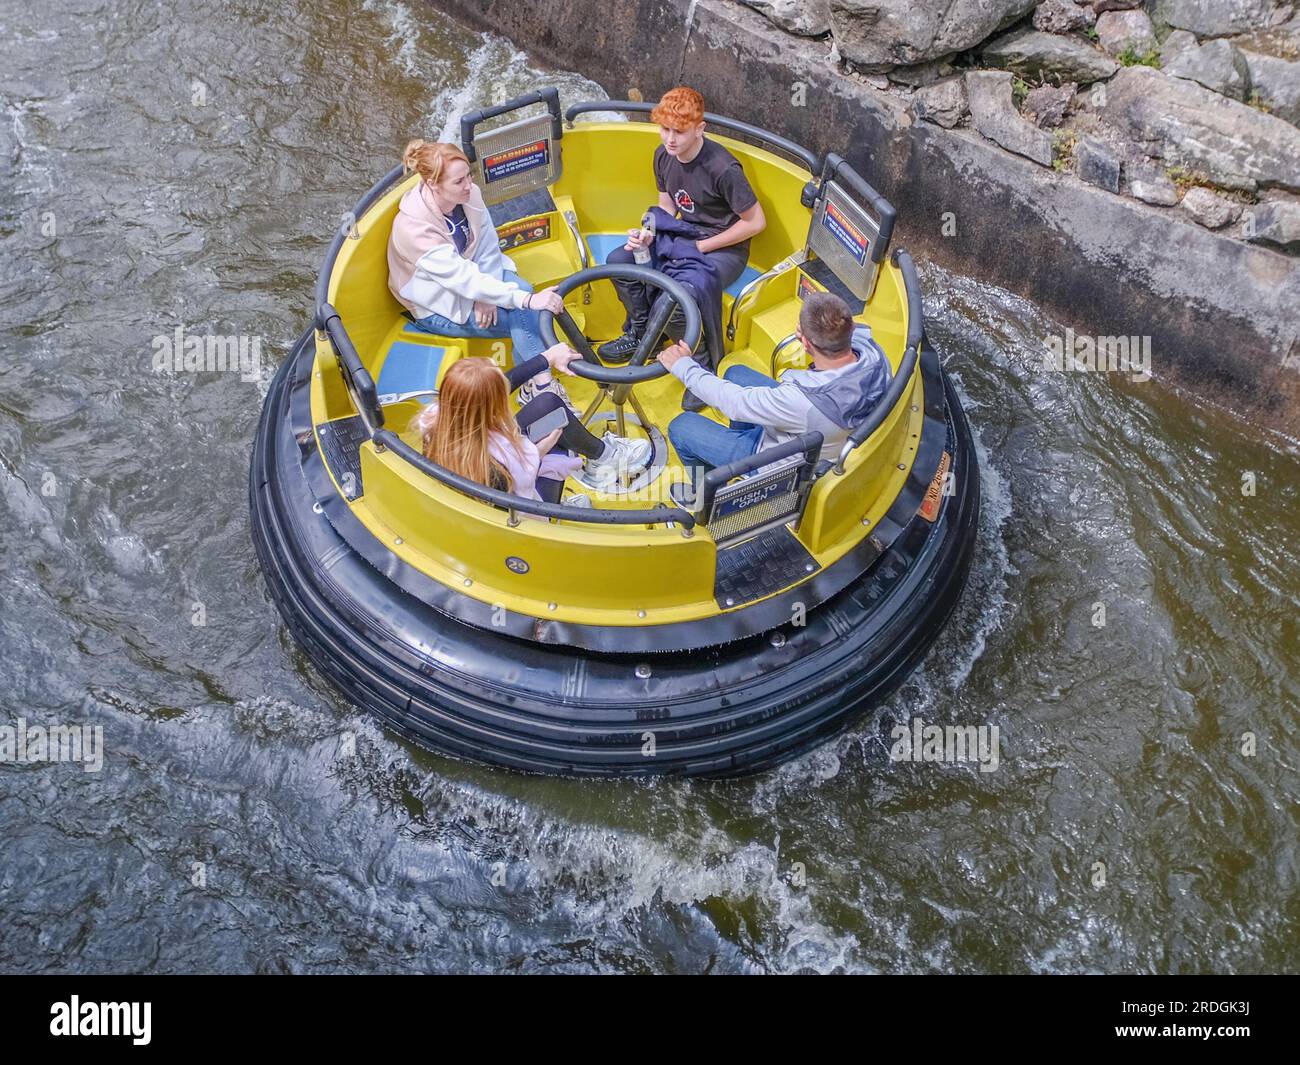 Lazy river rapids ride at a theme park Stock Photo